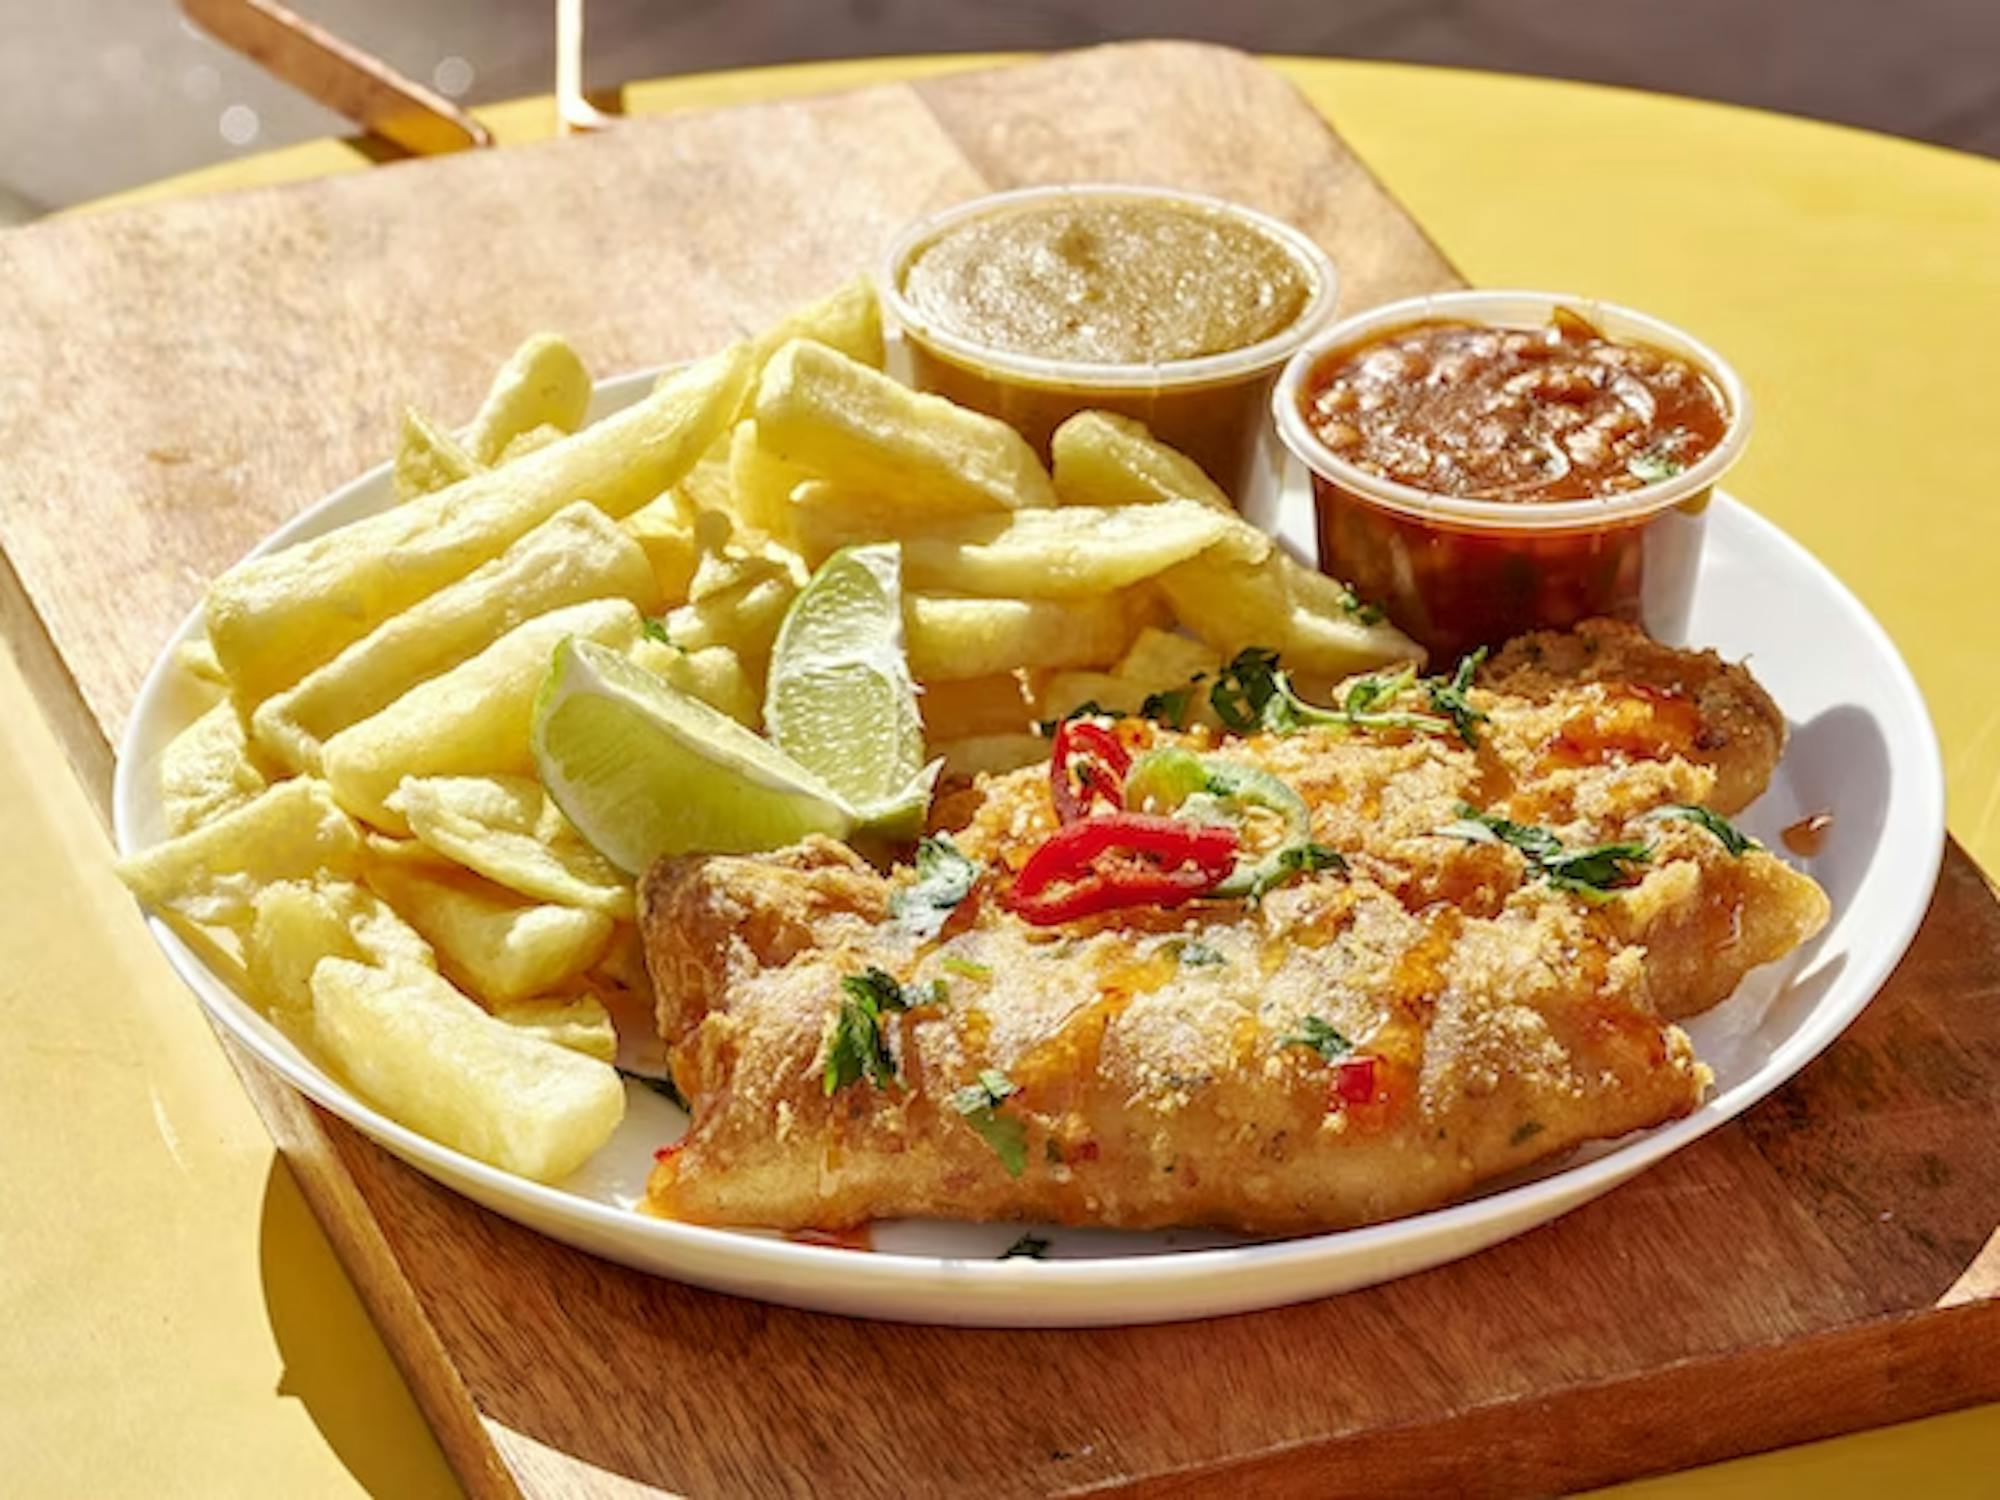 fish and chips on a plate with sauces